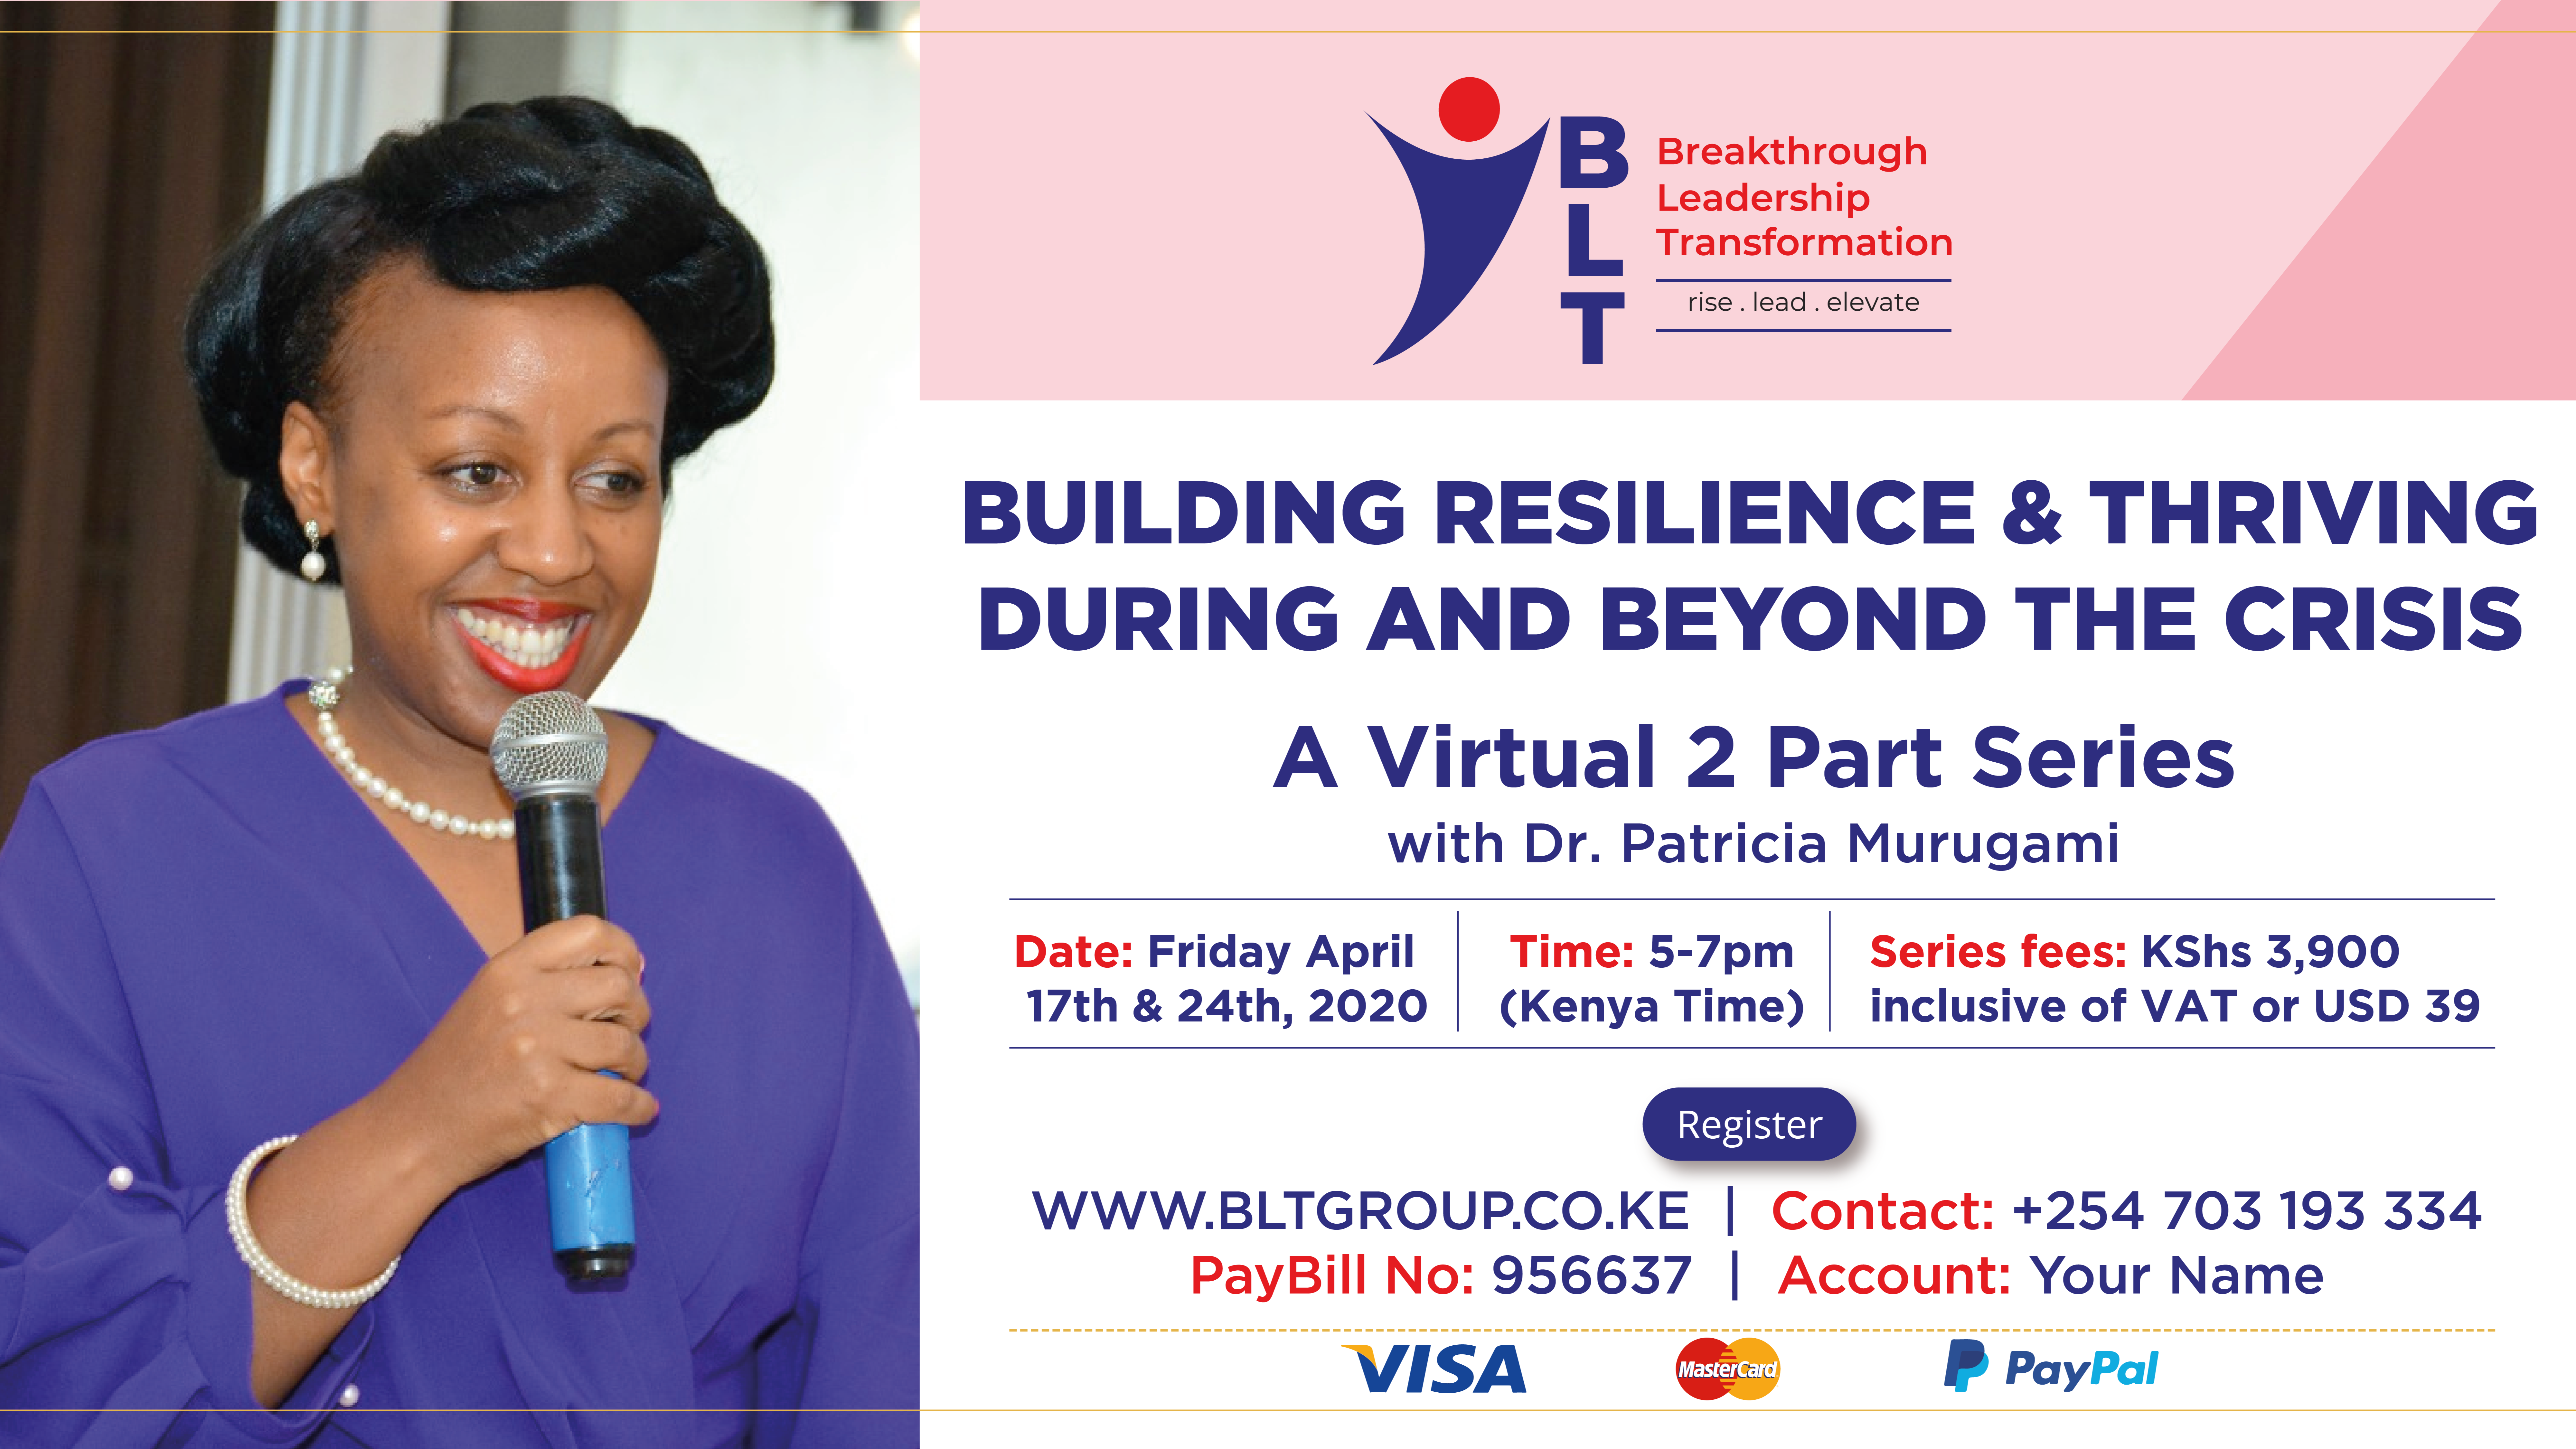 Building Resilience and Thriving During & Beyond the Crisis Digital Leadership Series